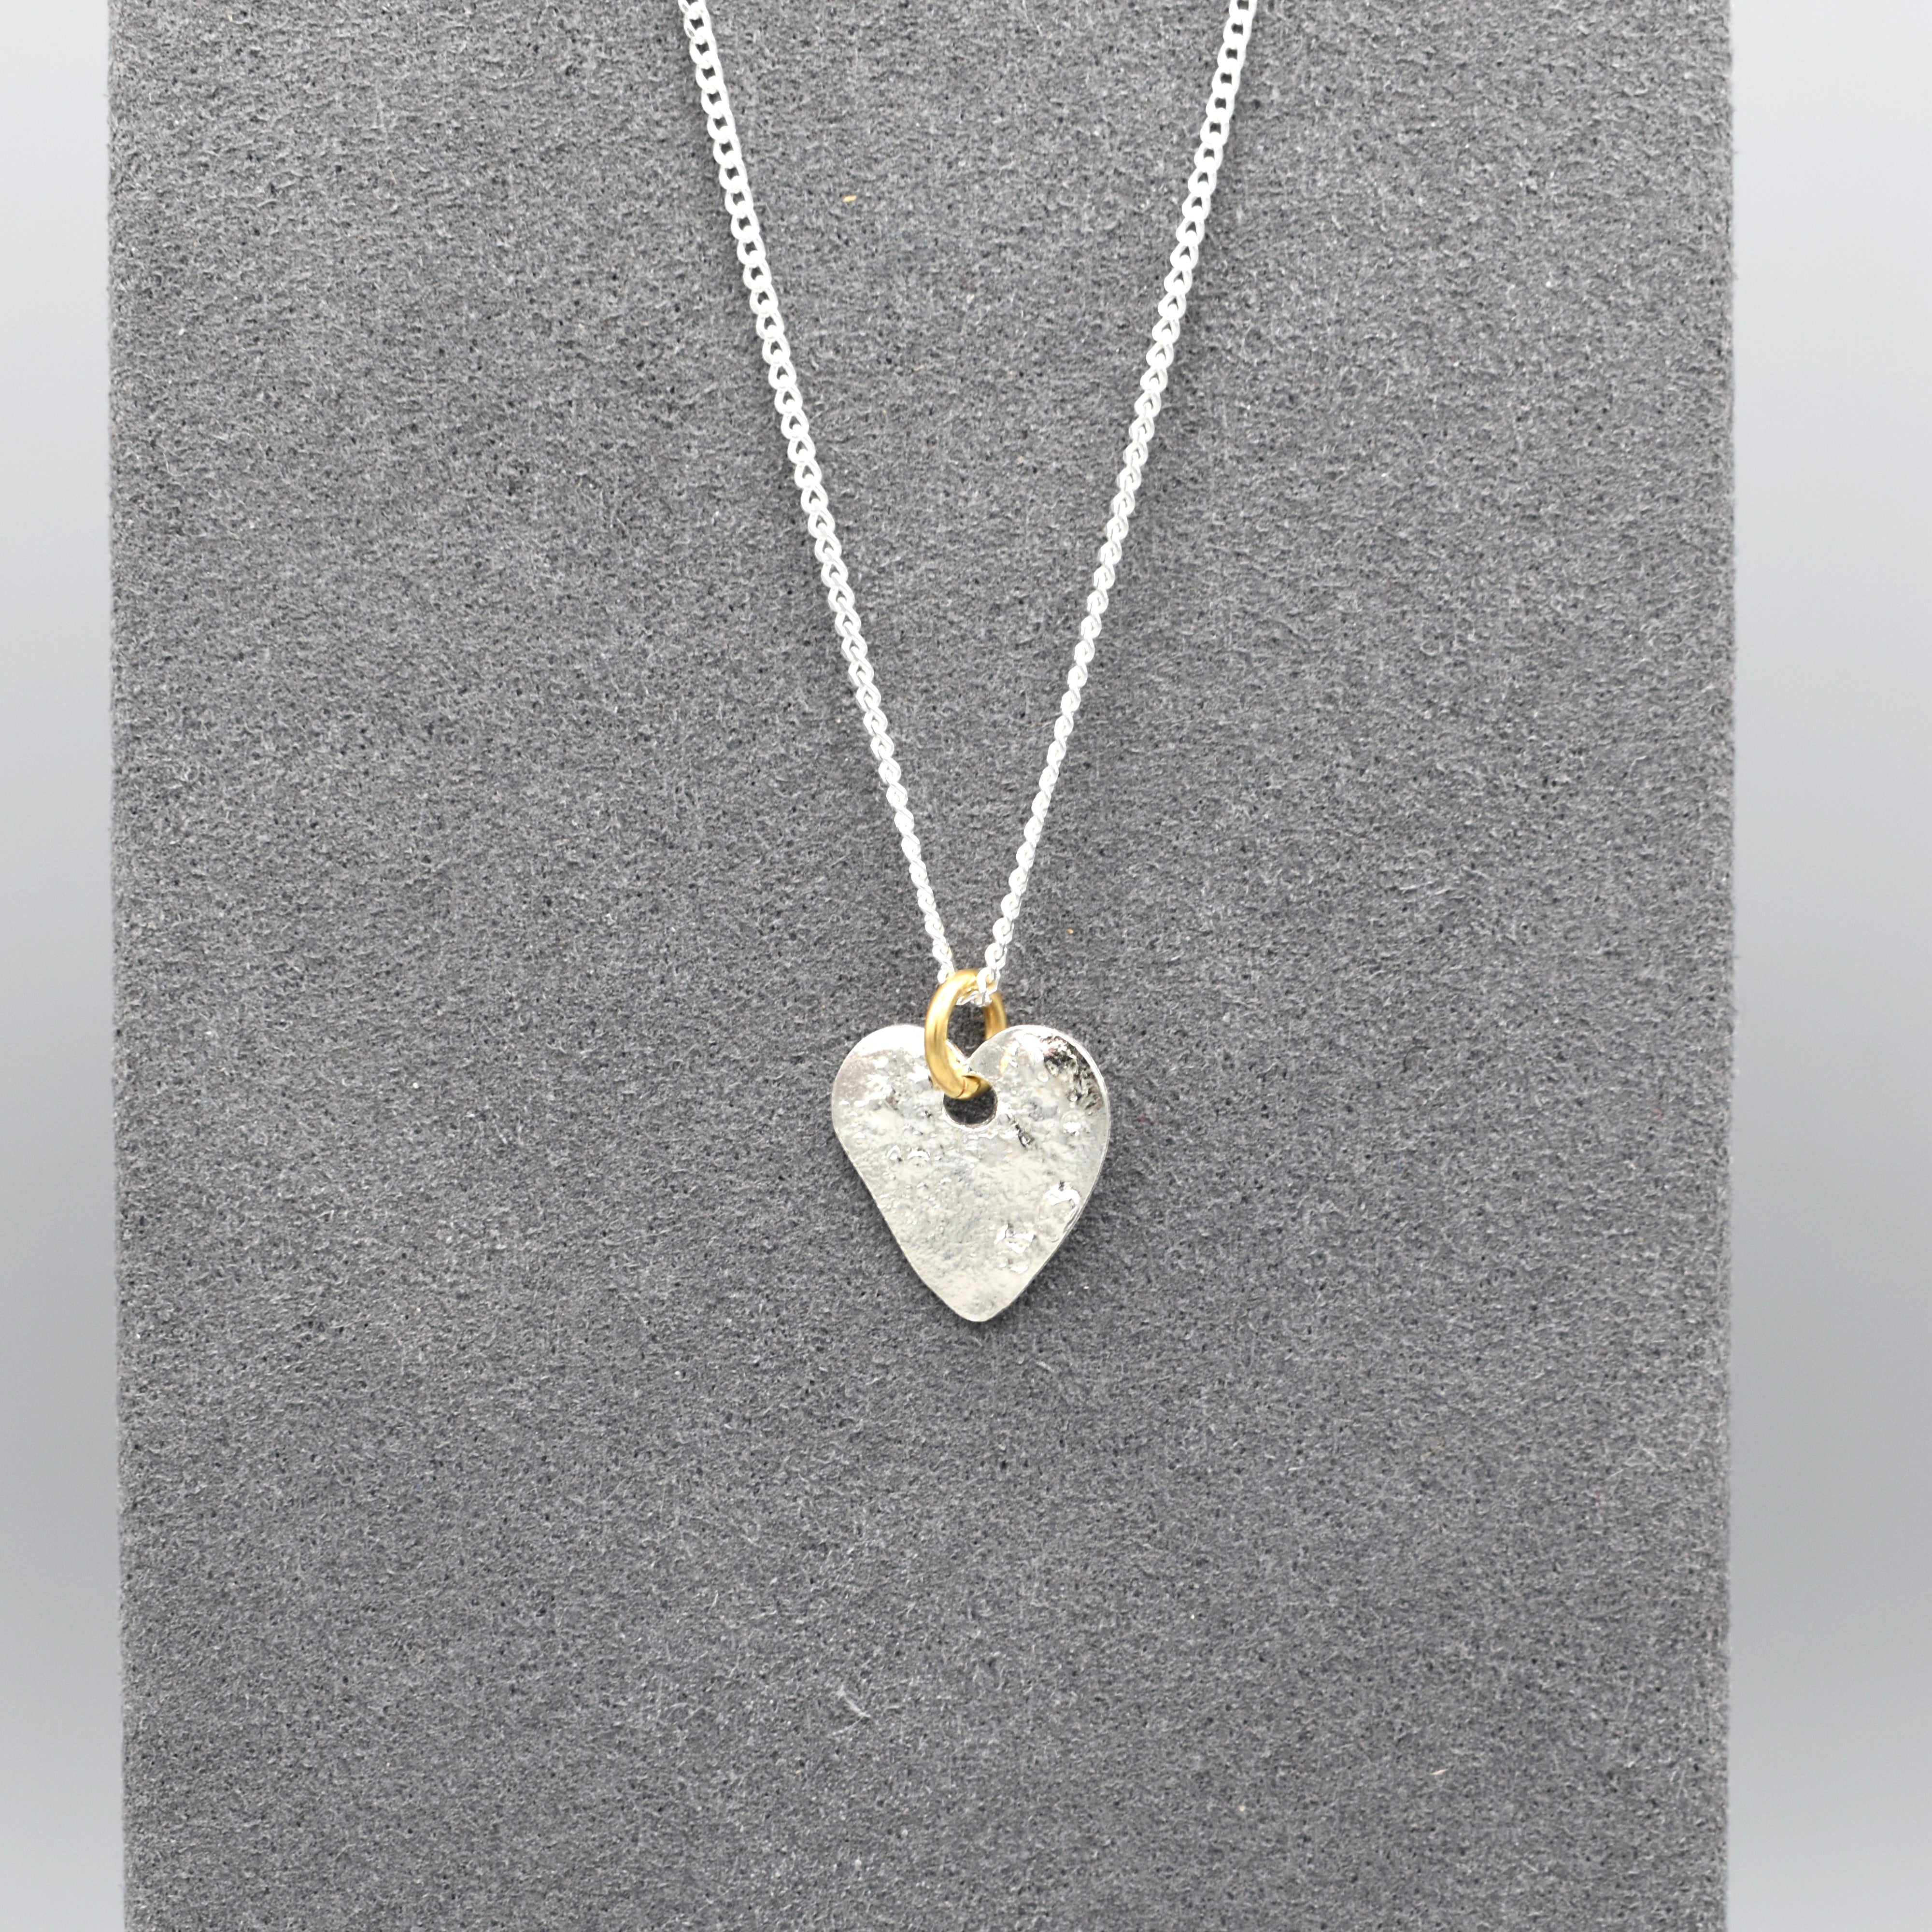 Silver Hammered Heart Pendant